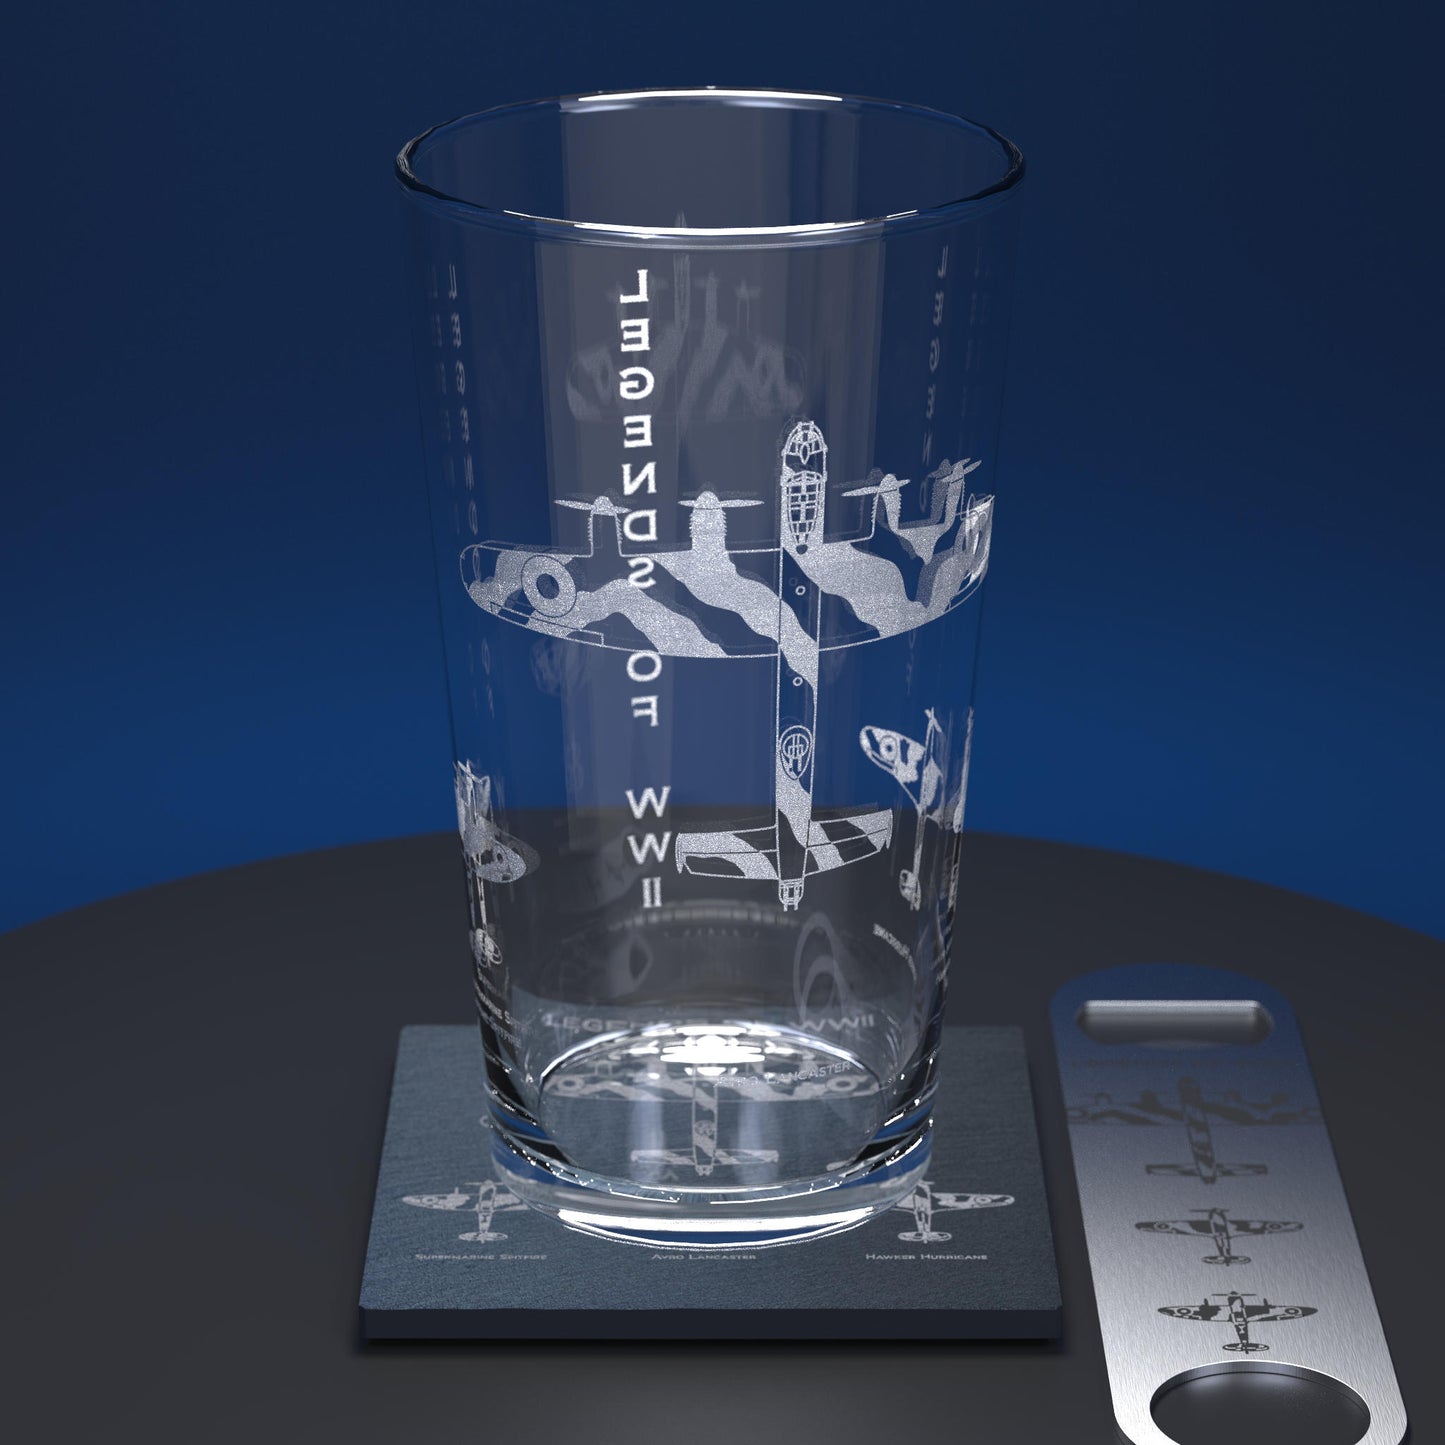 Pint glass sent comprising of glass, slate coaster and stainless steel bottle opener.  The matching engravings consists of the Spitfire, Lancaster and Hurricane, the words Legends of WW2 are engraved down the glass